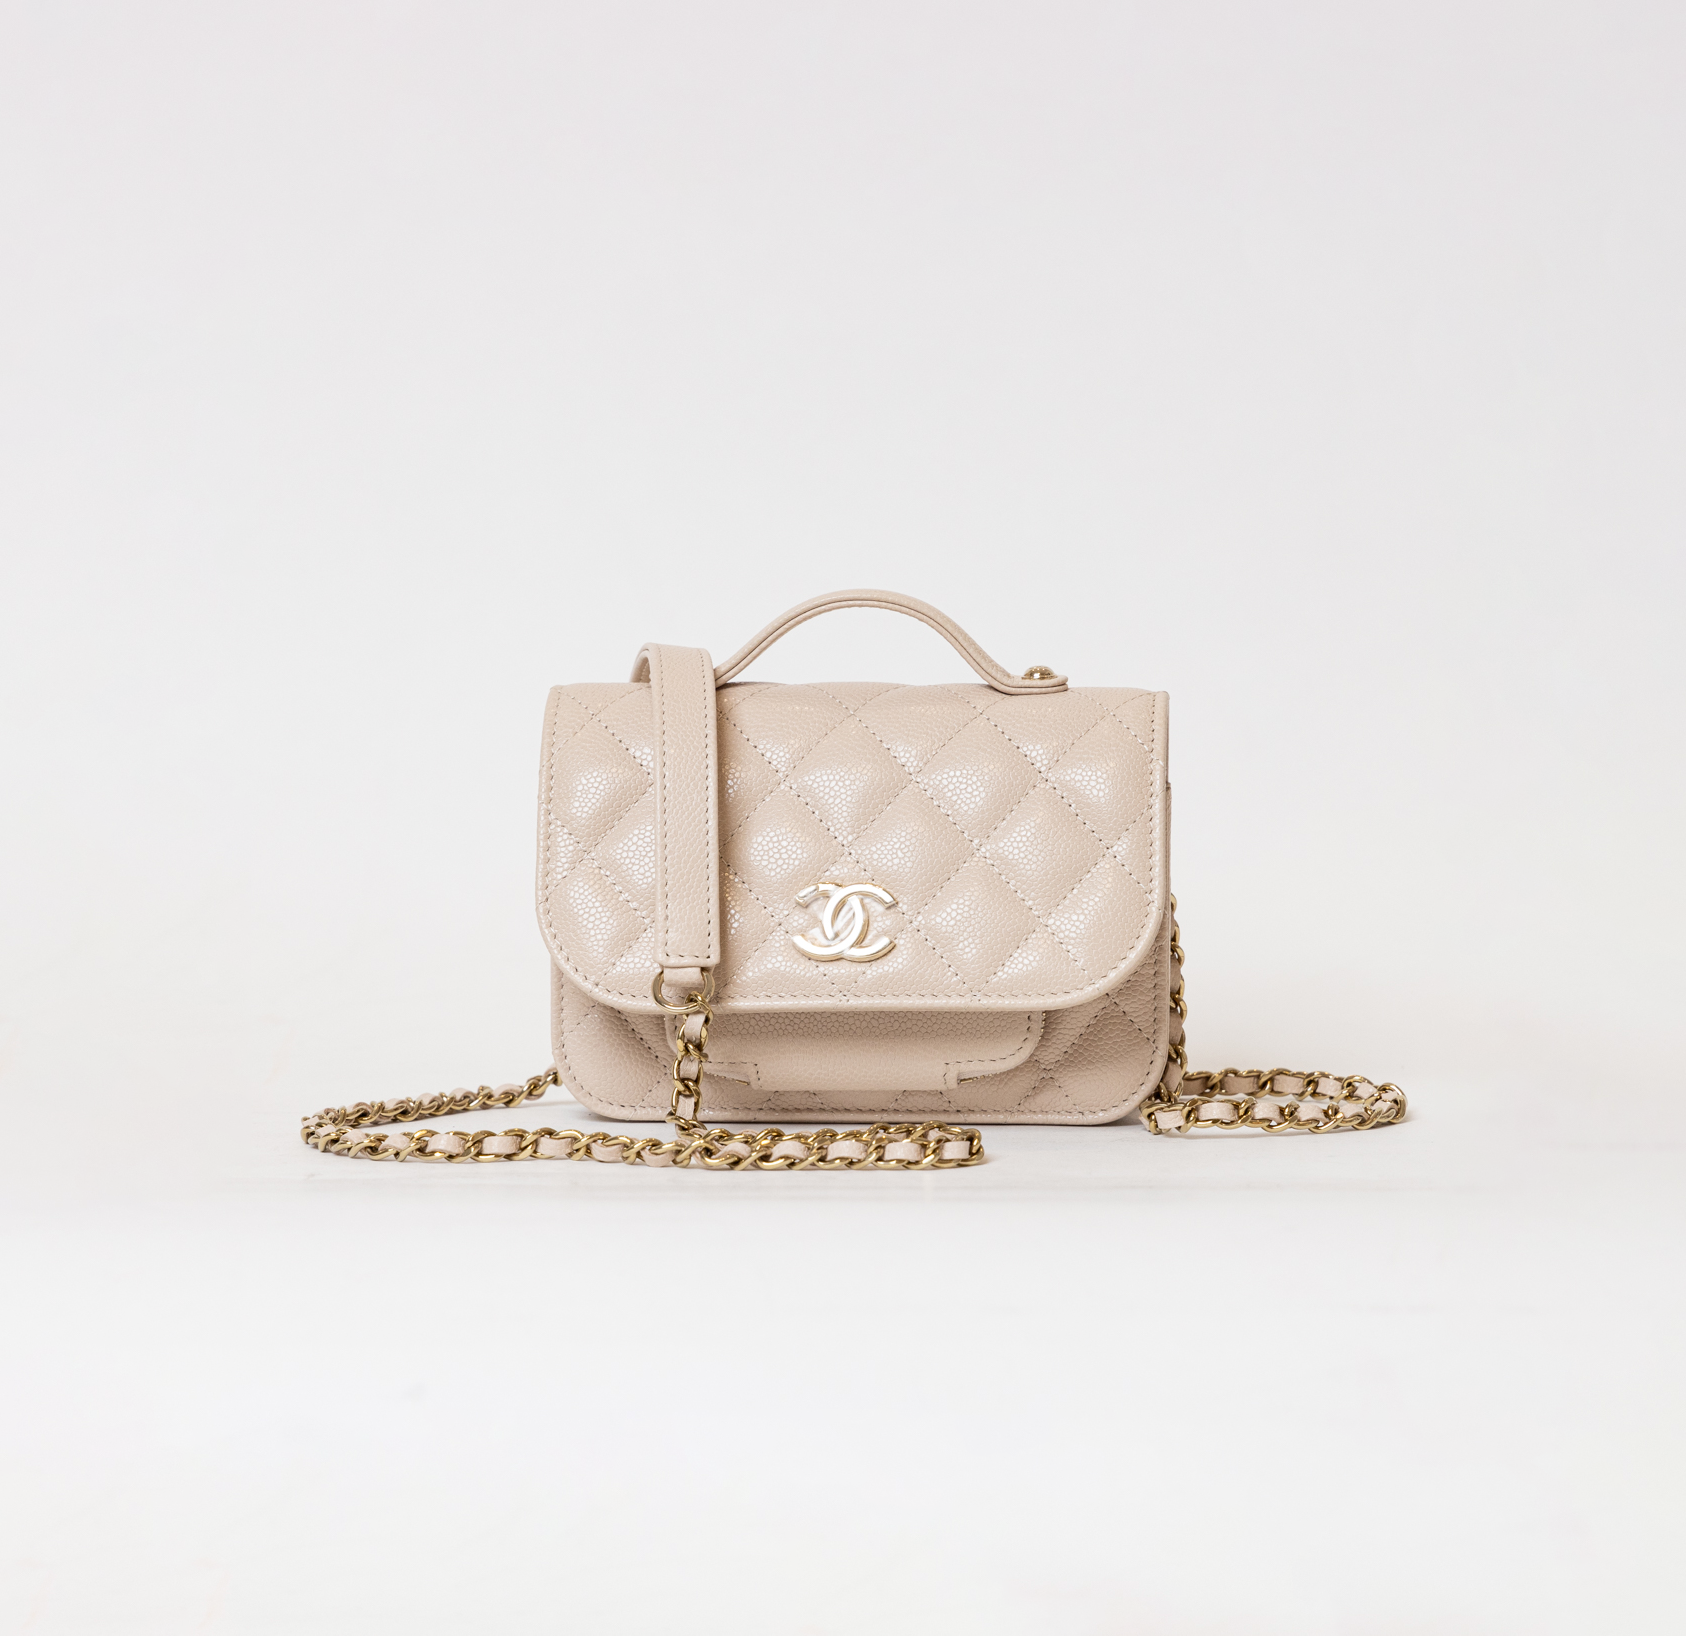 Chanel Micro Business Affinity Flap Bag in Ecru Caviar New Full